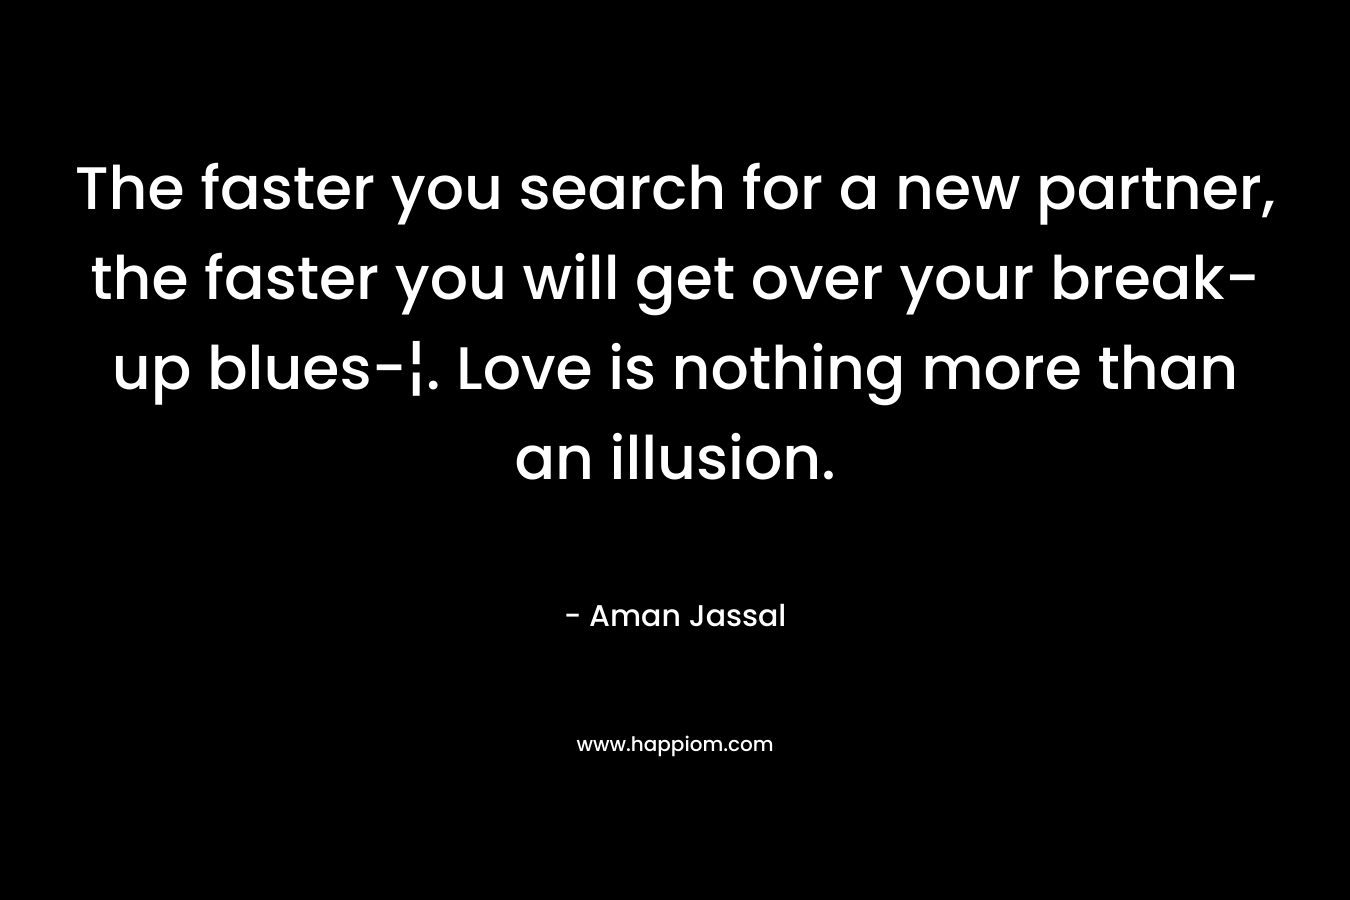 The faster you search for a new partner, the faster you will get over your break-up blues-¦. Love is nothing more than an illusion.